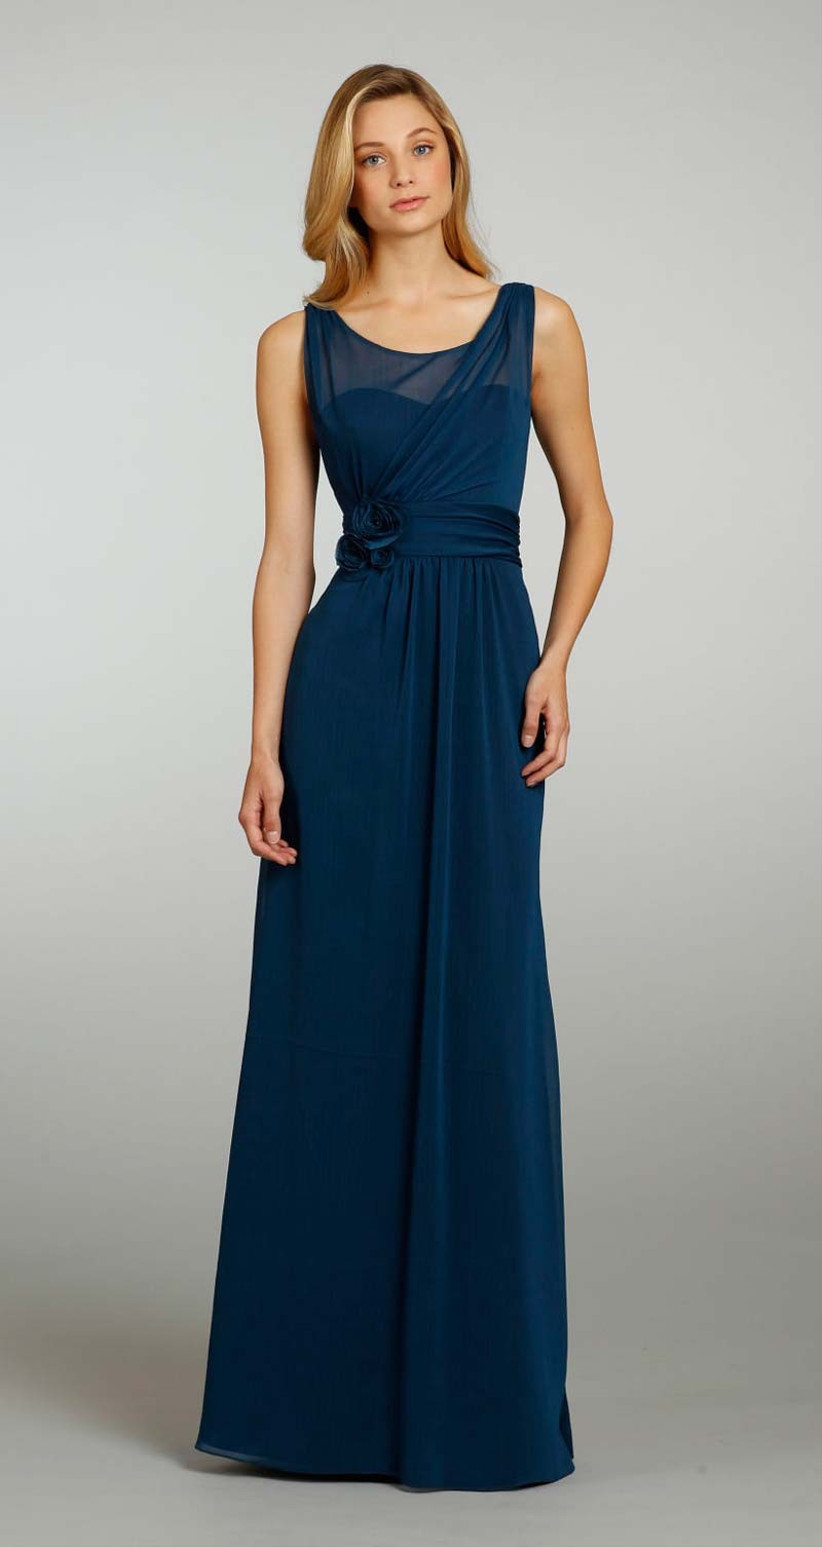 The Best Navy Bridesmaid Dresses Hitched Co Uk